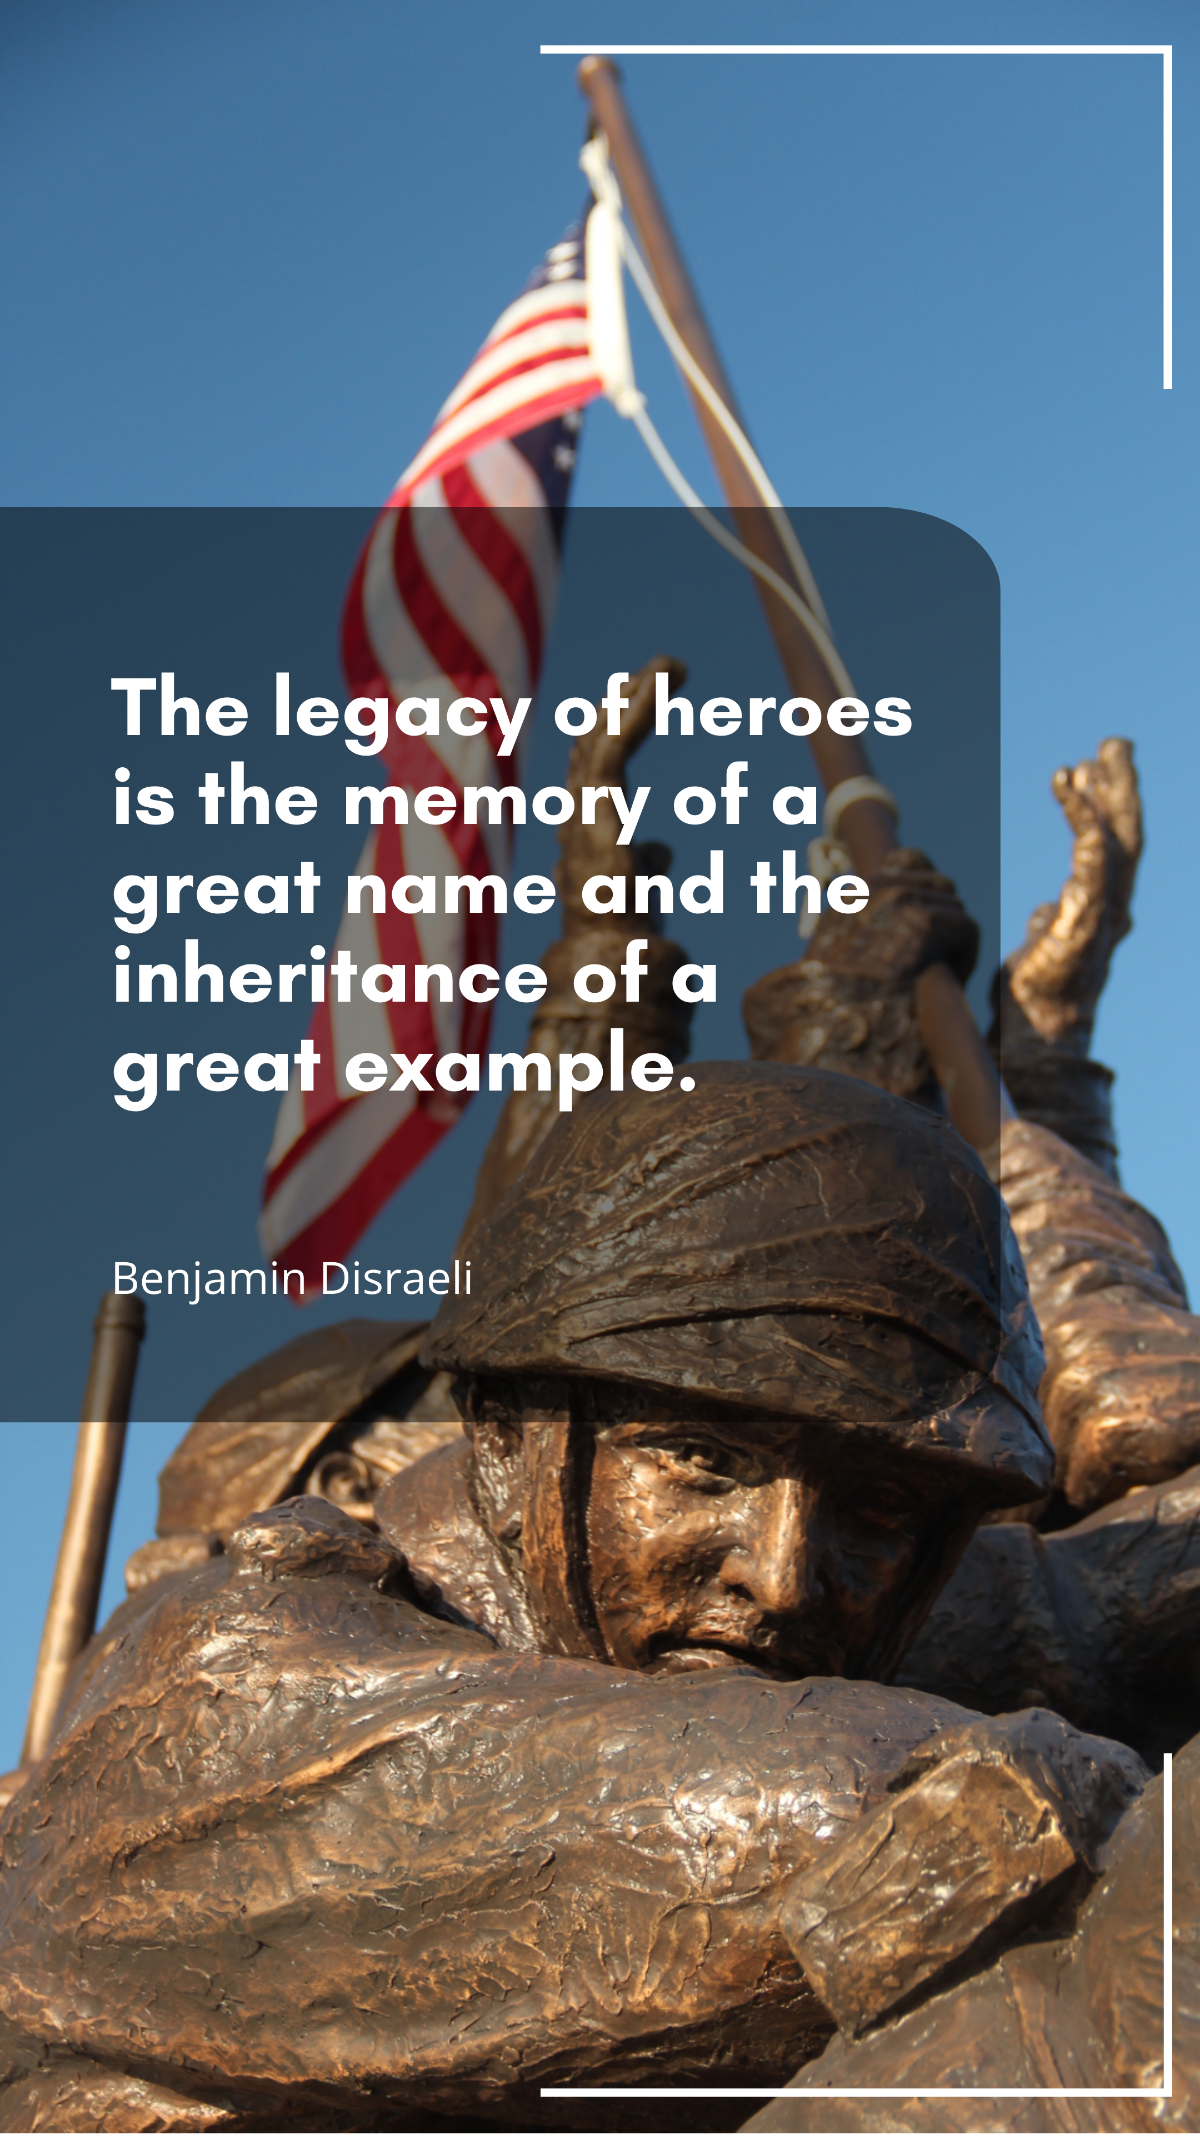 Benjamin Disraeli - The legacy of heroes is the memory of a great name and the inheritance of a great example. Template